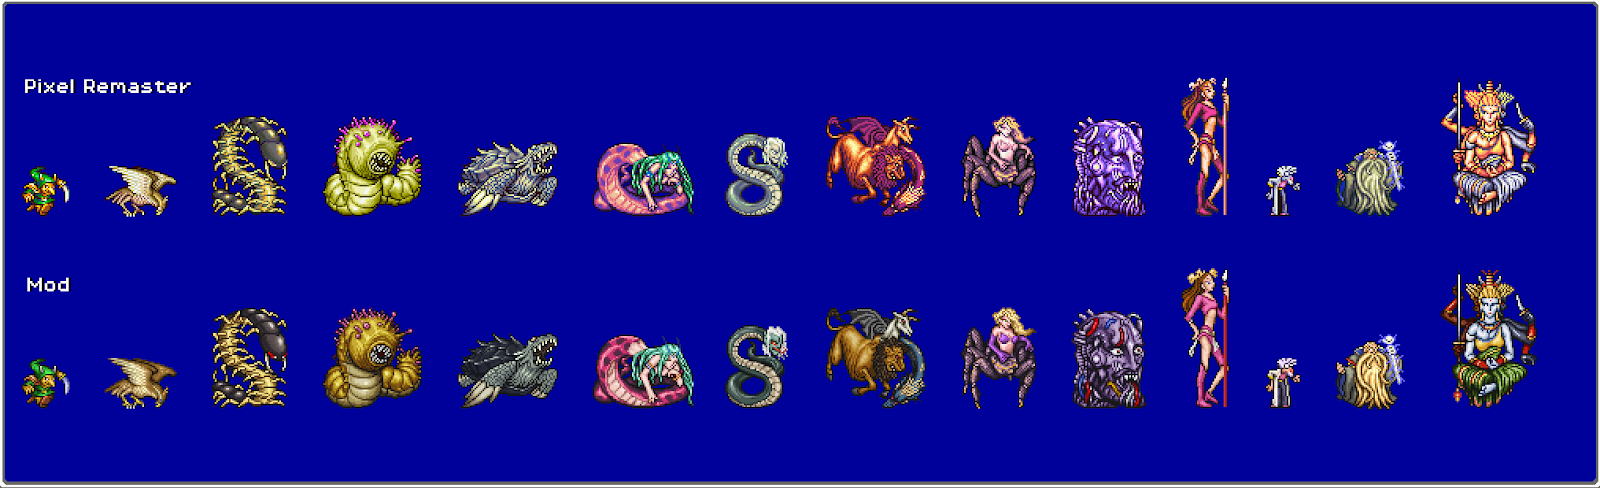 FF4: Complete Modding Guide and Index image 338